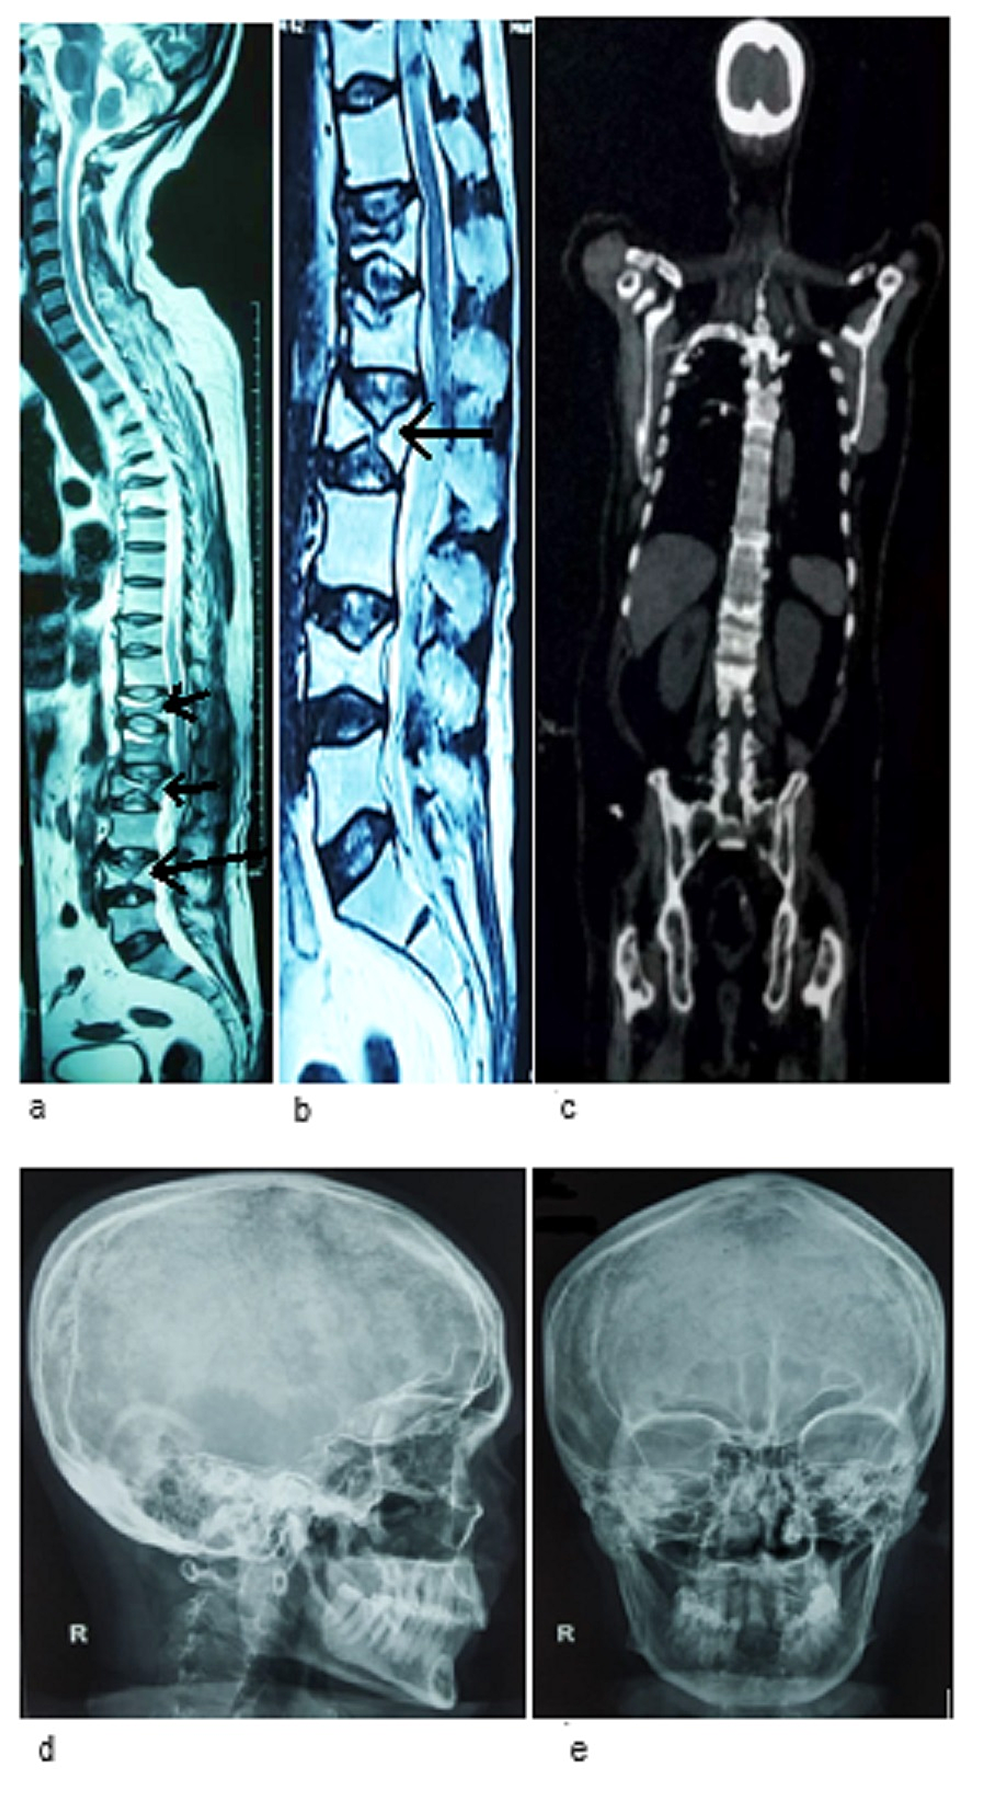 MRI of the dorso-lumbar spine showing a partial collapse of the D12